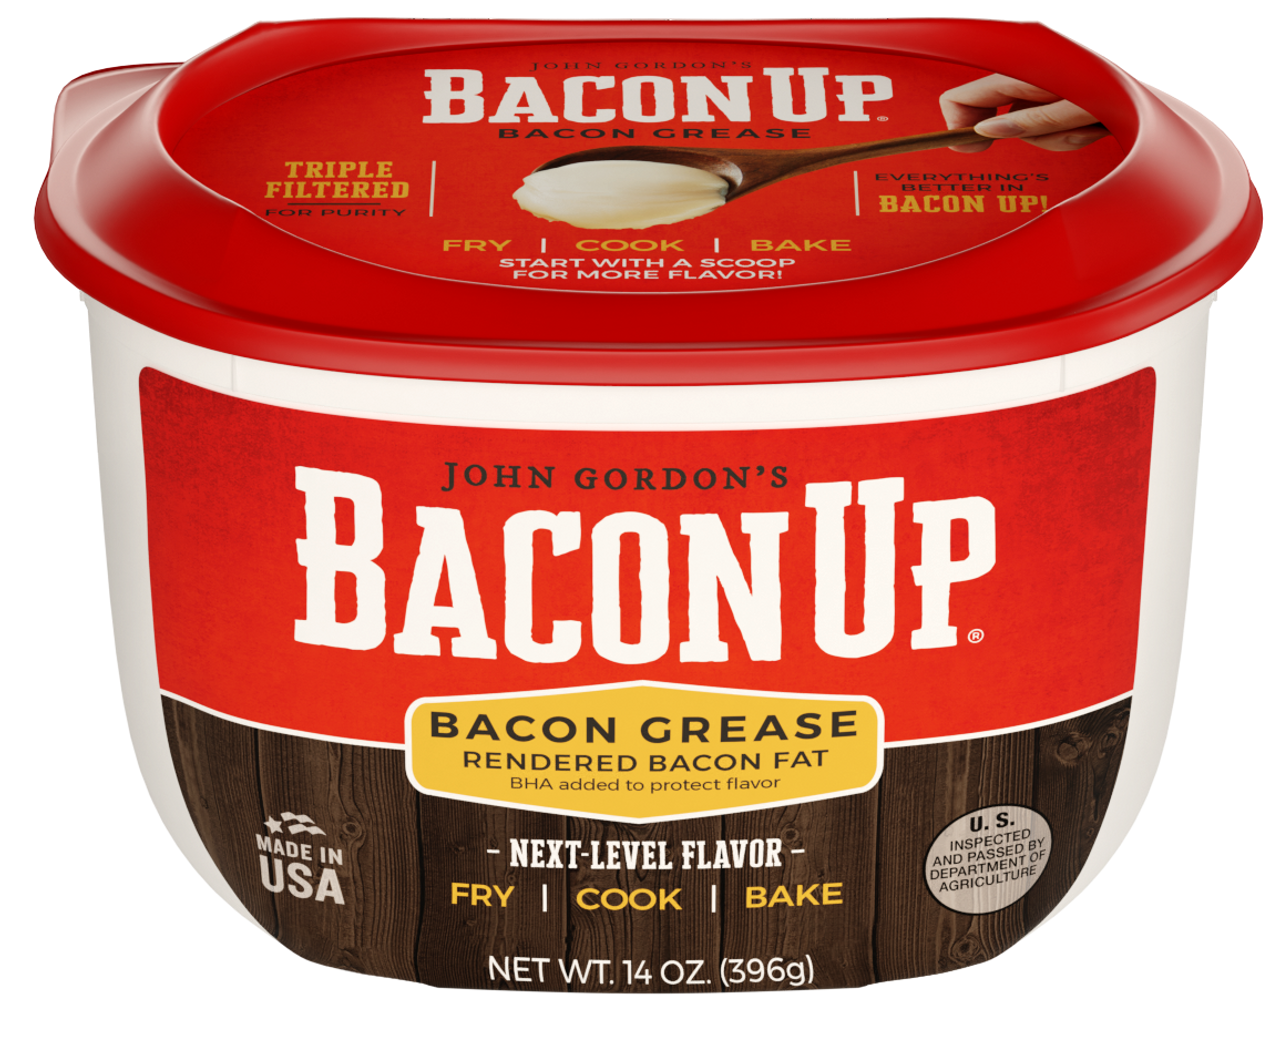 Bacon Up Bacon Grease for Cooking - 9lb Pail of Authentic Bacon